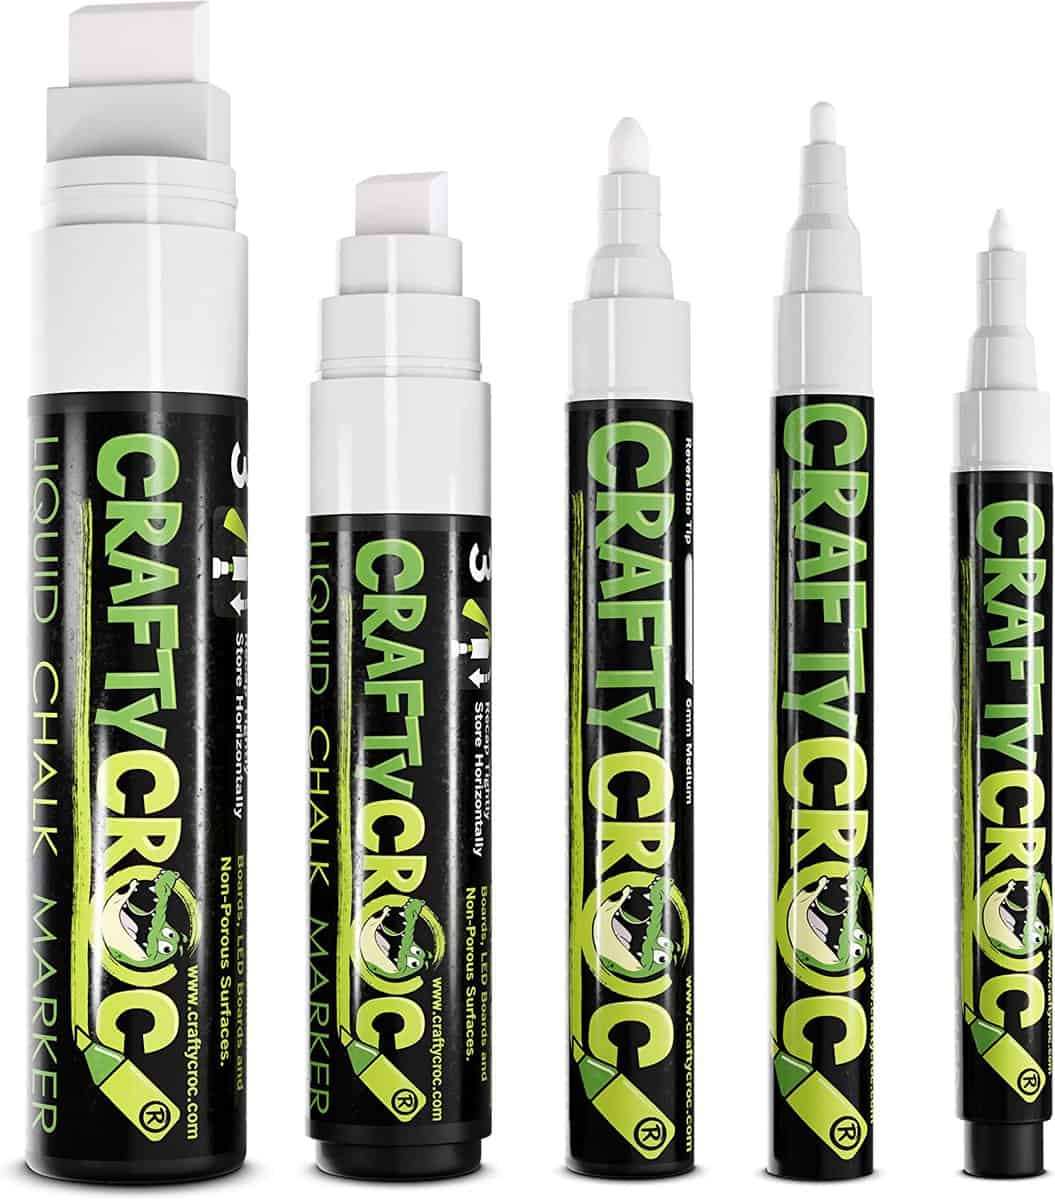 American Crafts Markers, Chalk - 5 markers